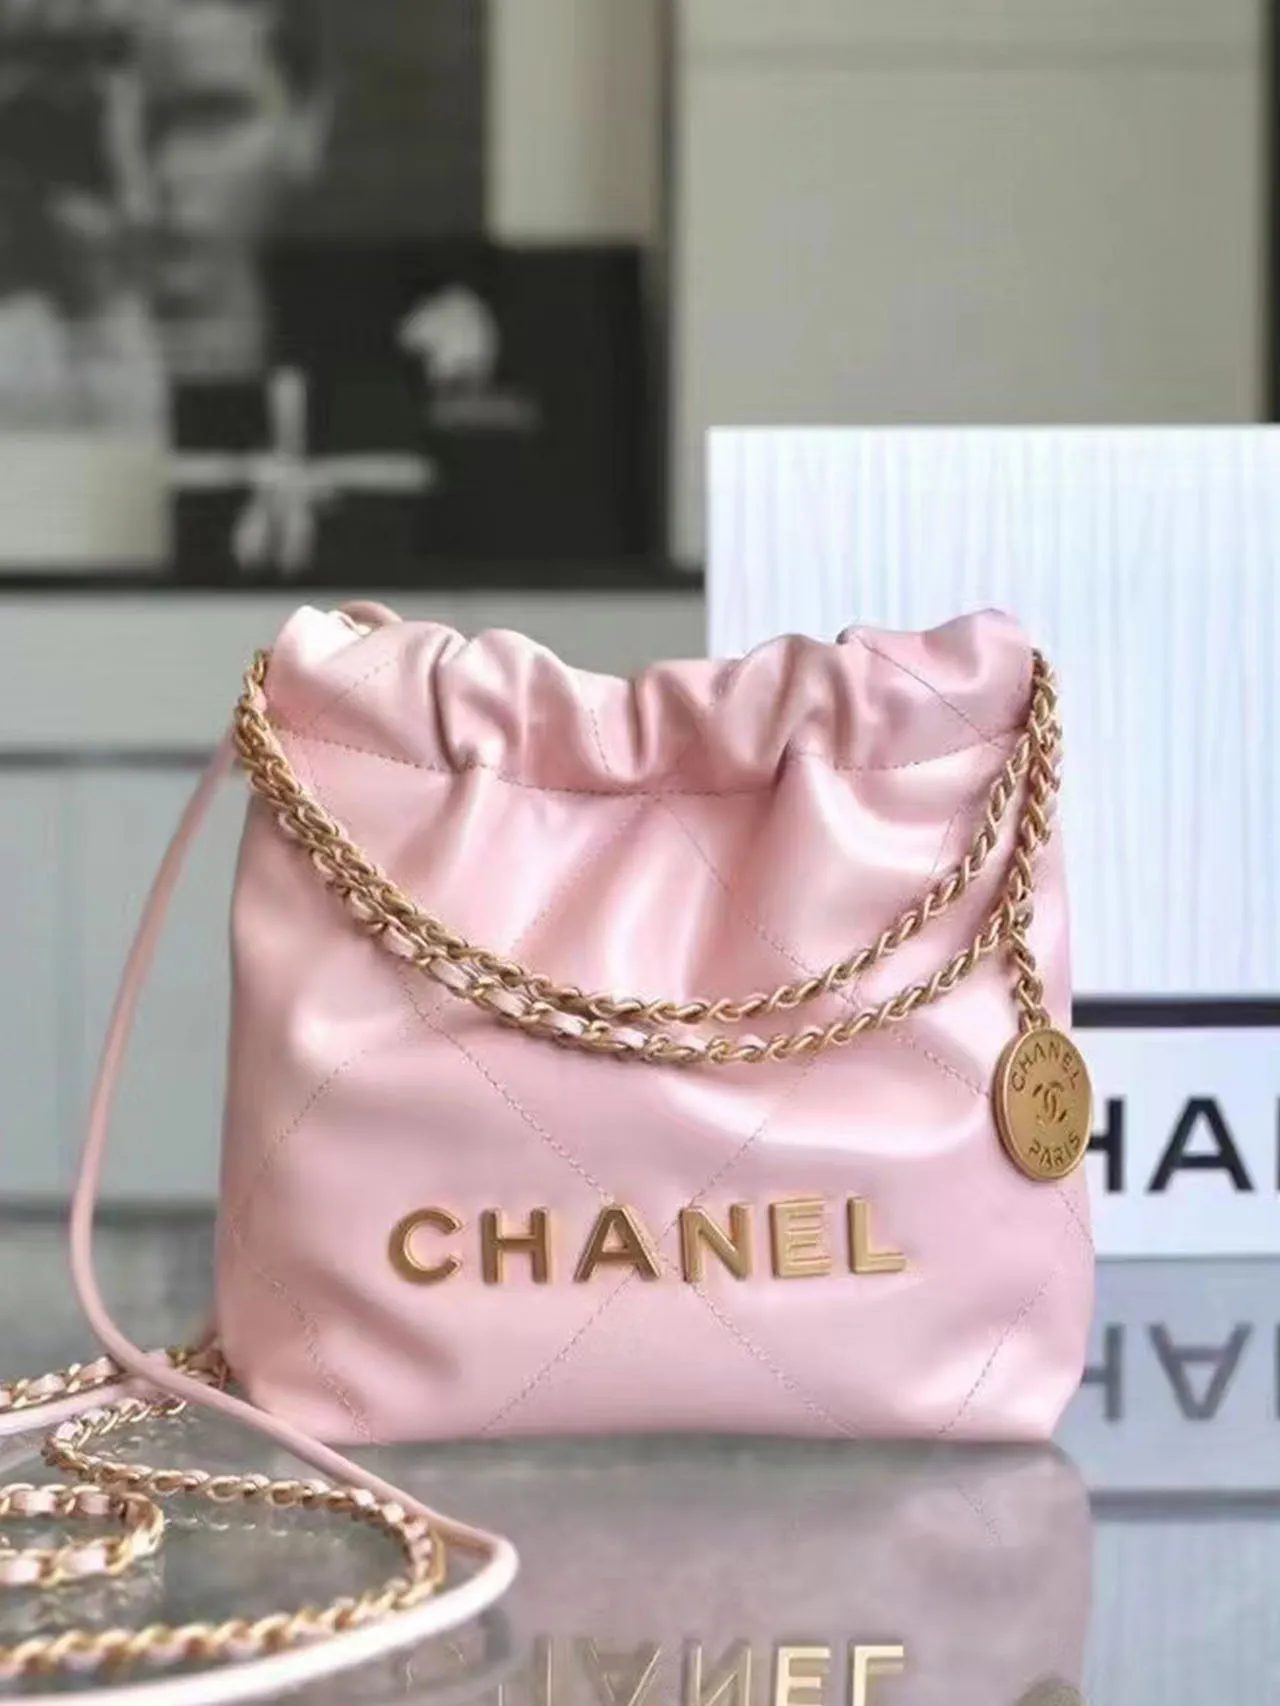 Chanel 22 Bag Review, Chanel's New Style Is Equal Parts Modern and  Timeless